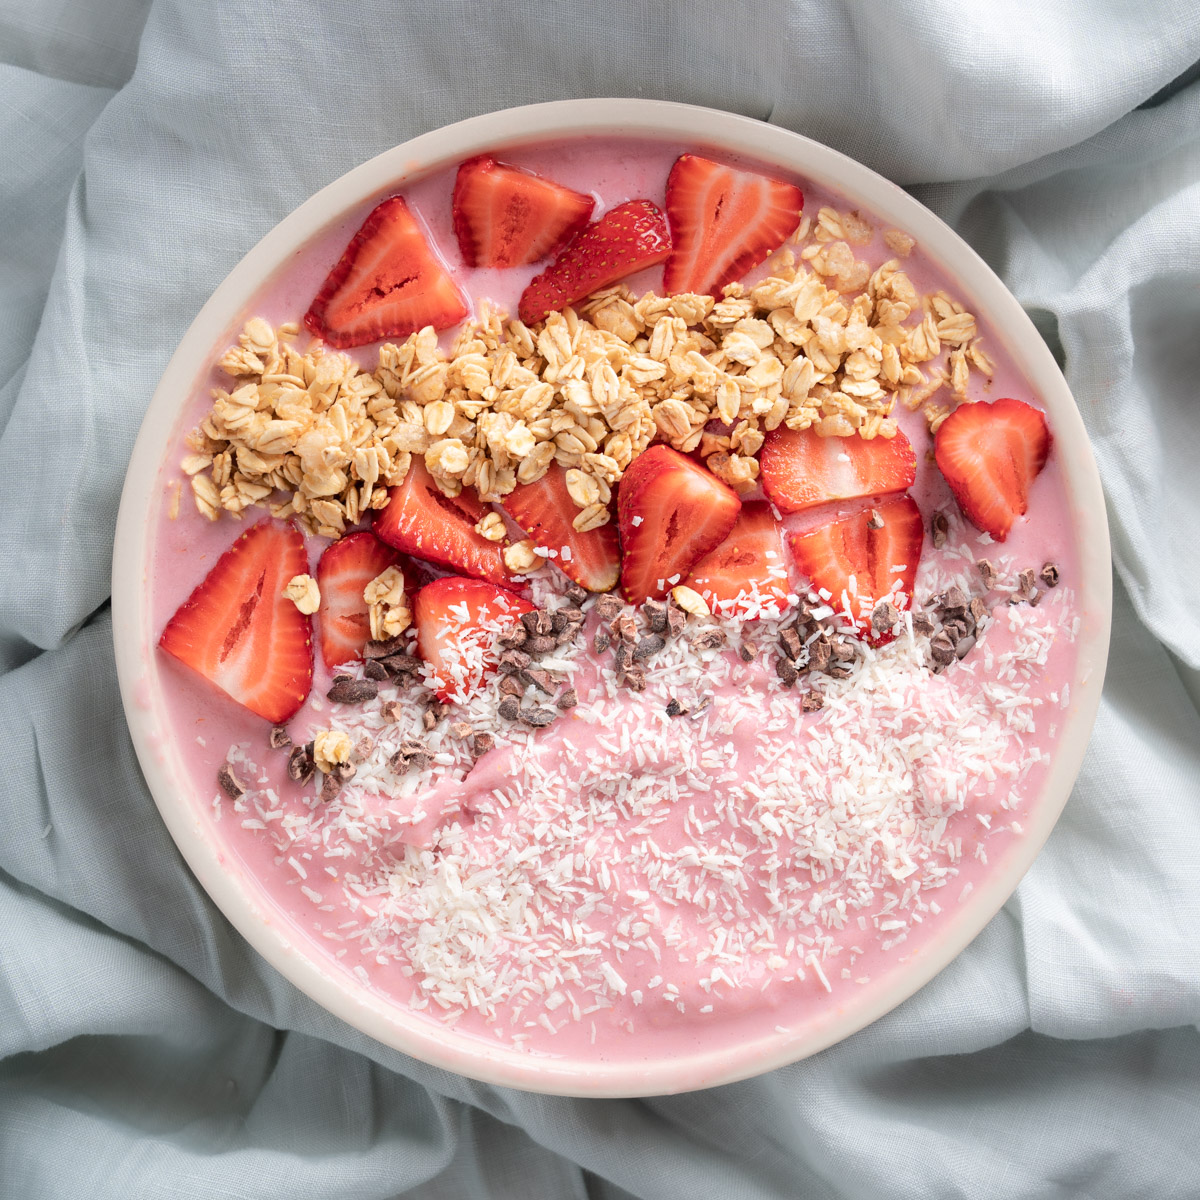 Strawberry Smoothie Bowl with pink smoothie base. Smoothie bowl is topped with coconut flakes, sliced strawberries, granola, and cocoa nibs. Bowl is placed on a sage linen table cloth. 